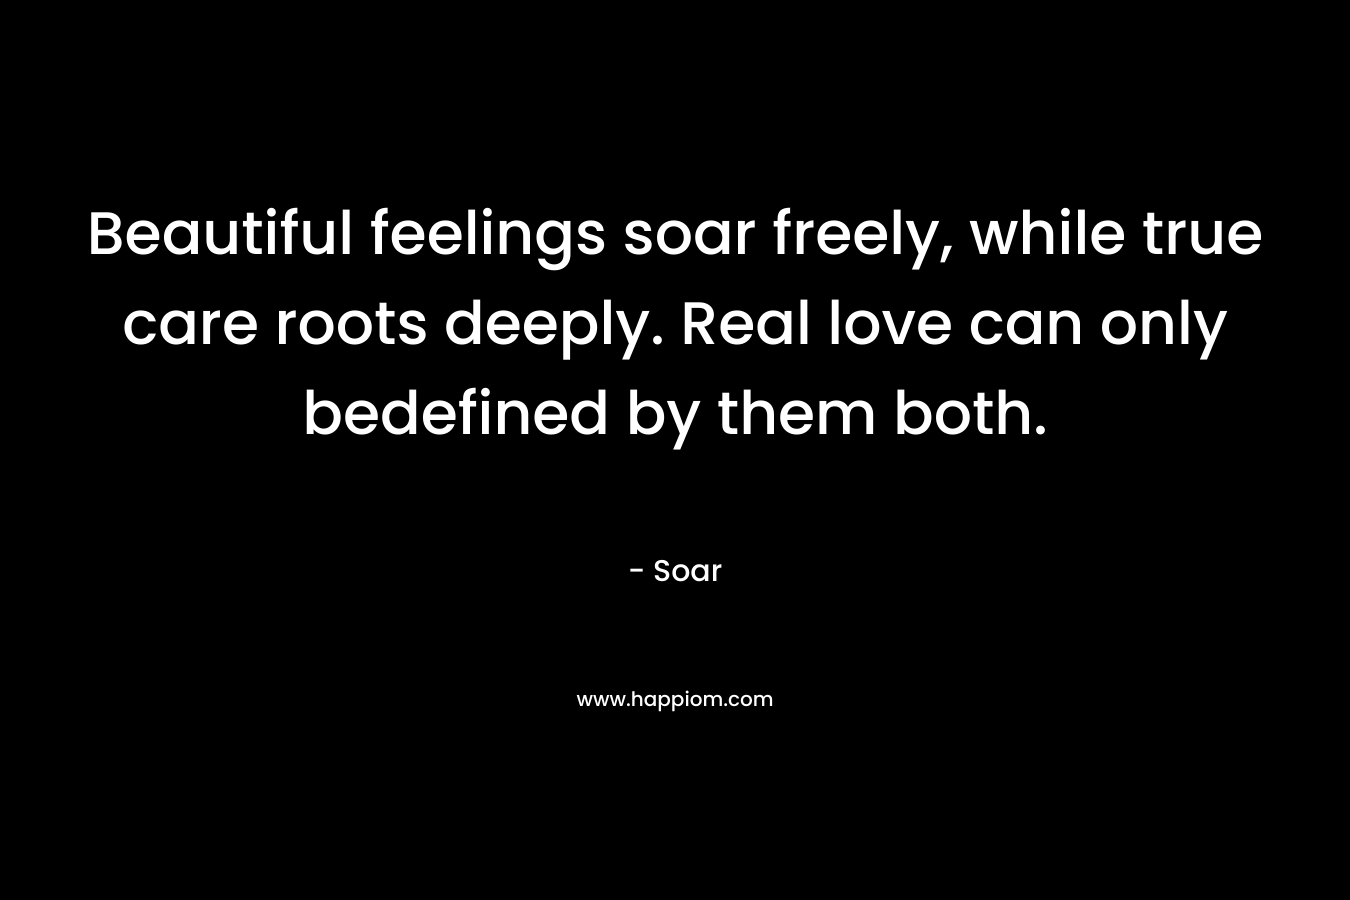 Beautiful feelings soar freely, while true care roots deeply. Real love can only bedefined by them both. – Soar